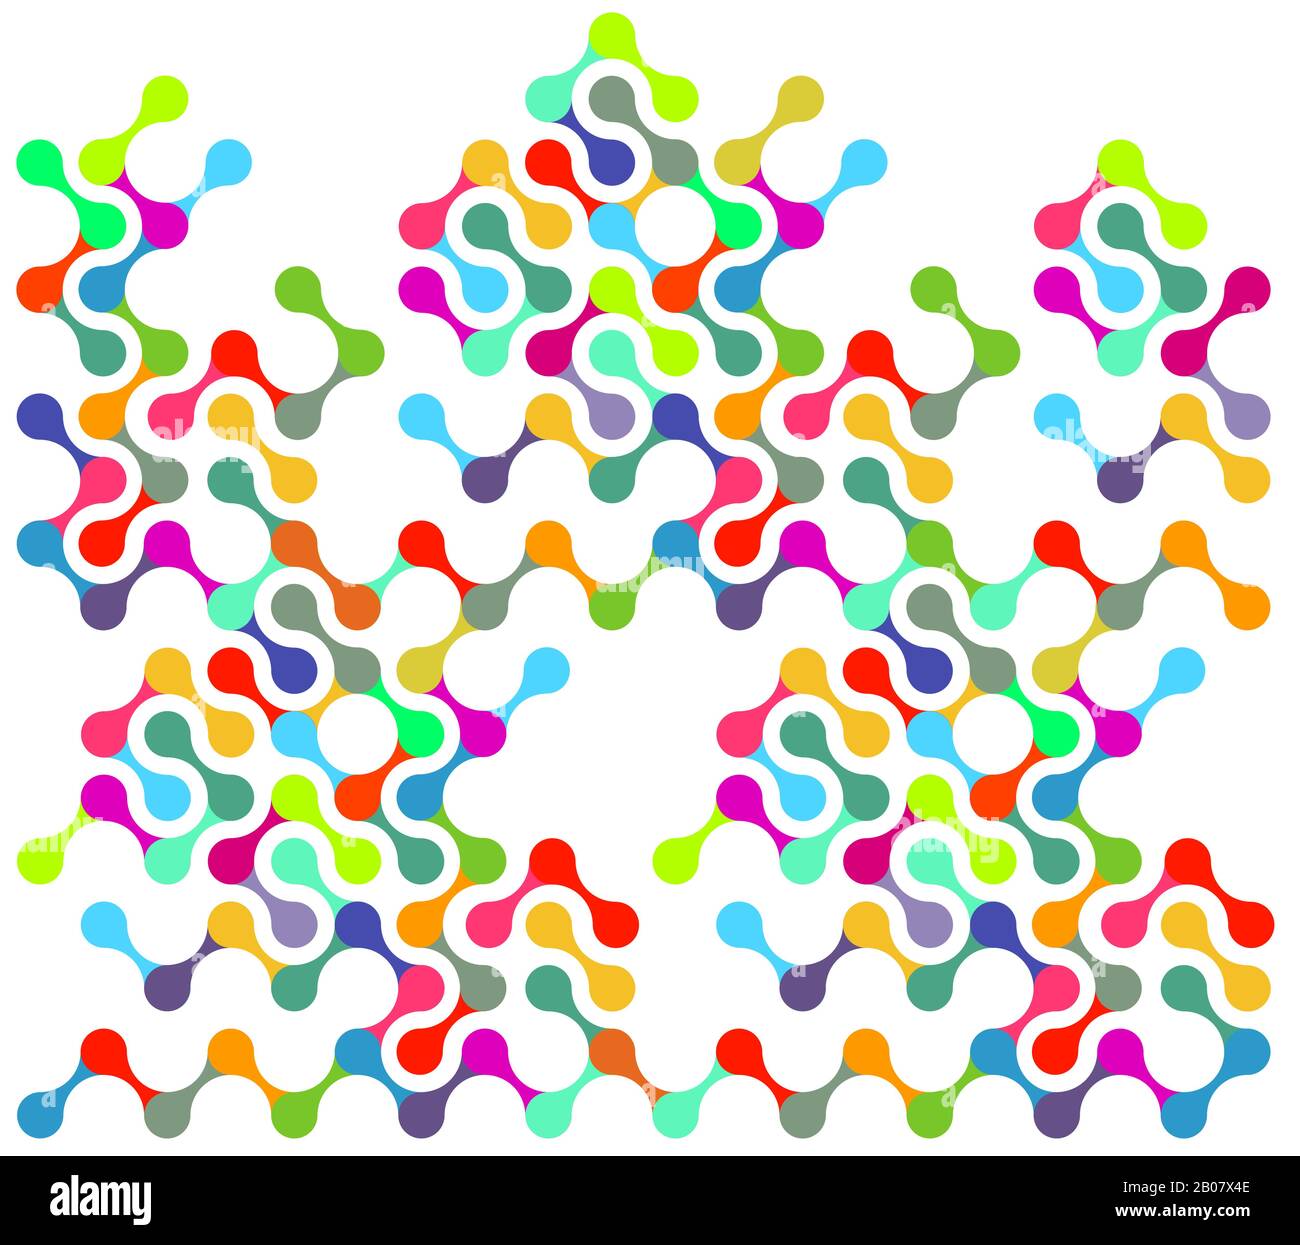 Connection, colorful abstract graphic concept illustration Stock Vector